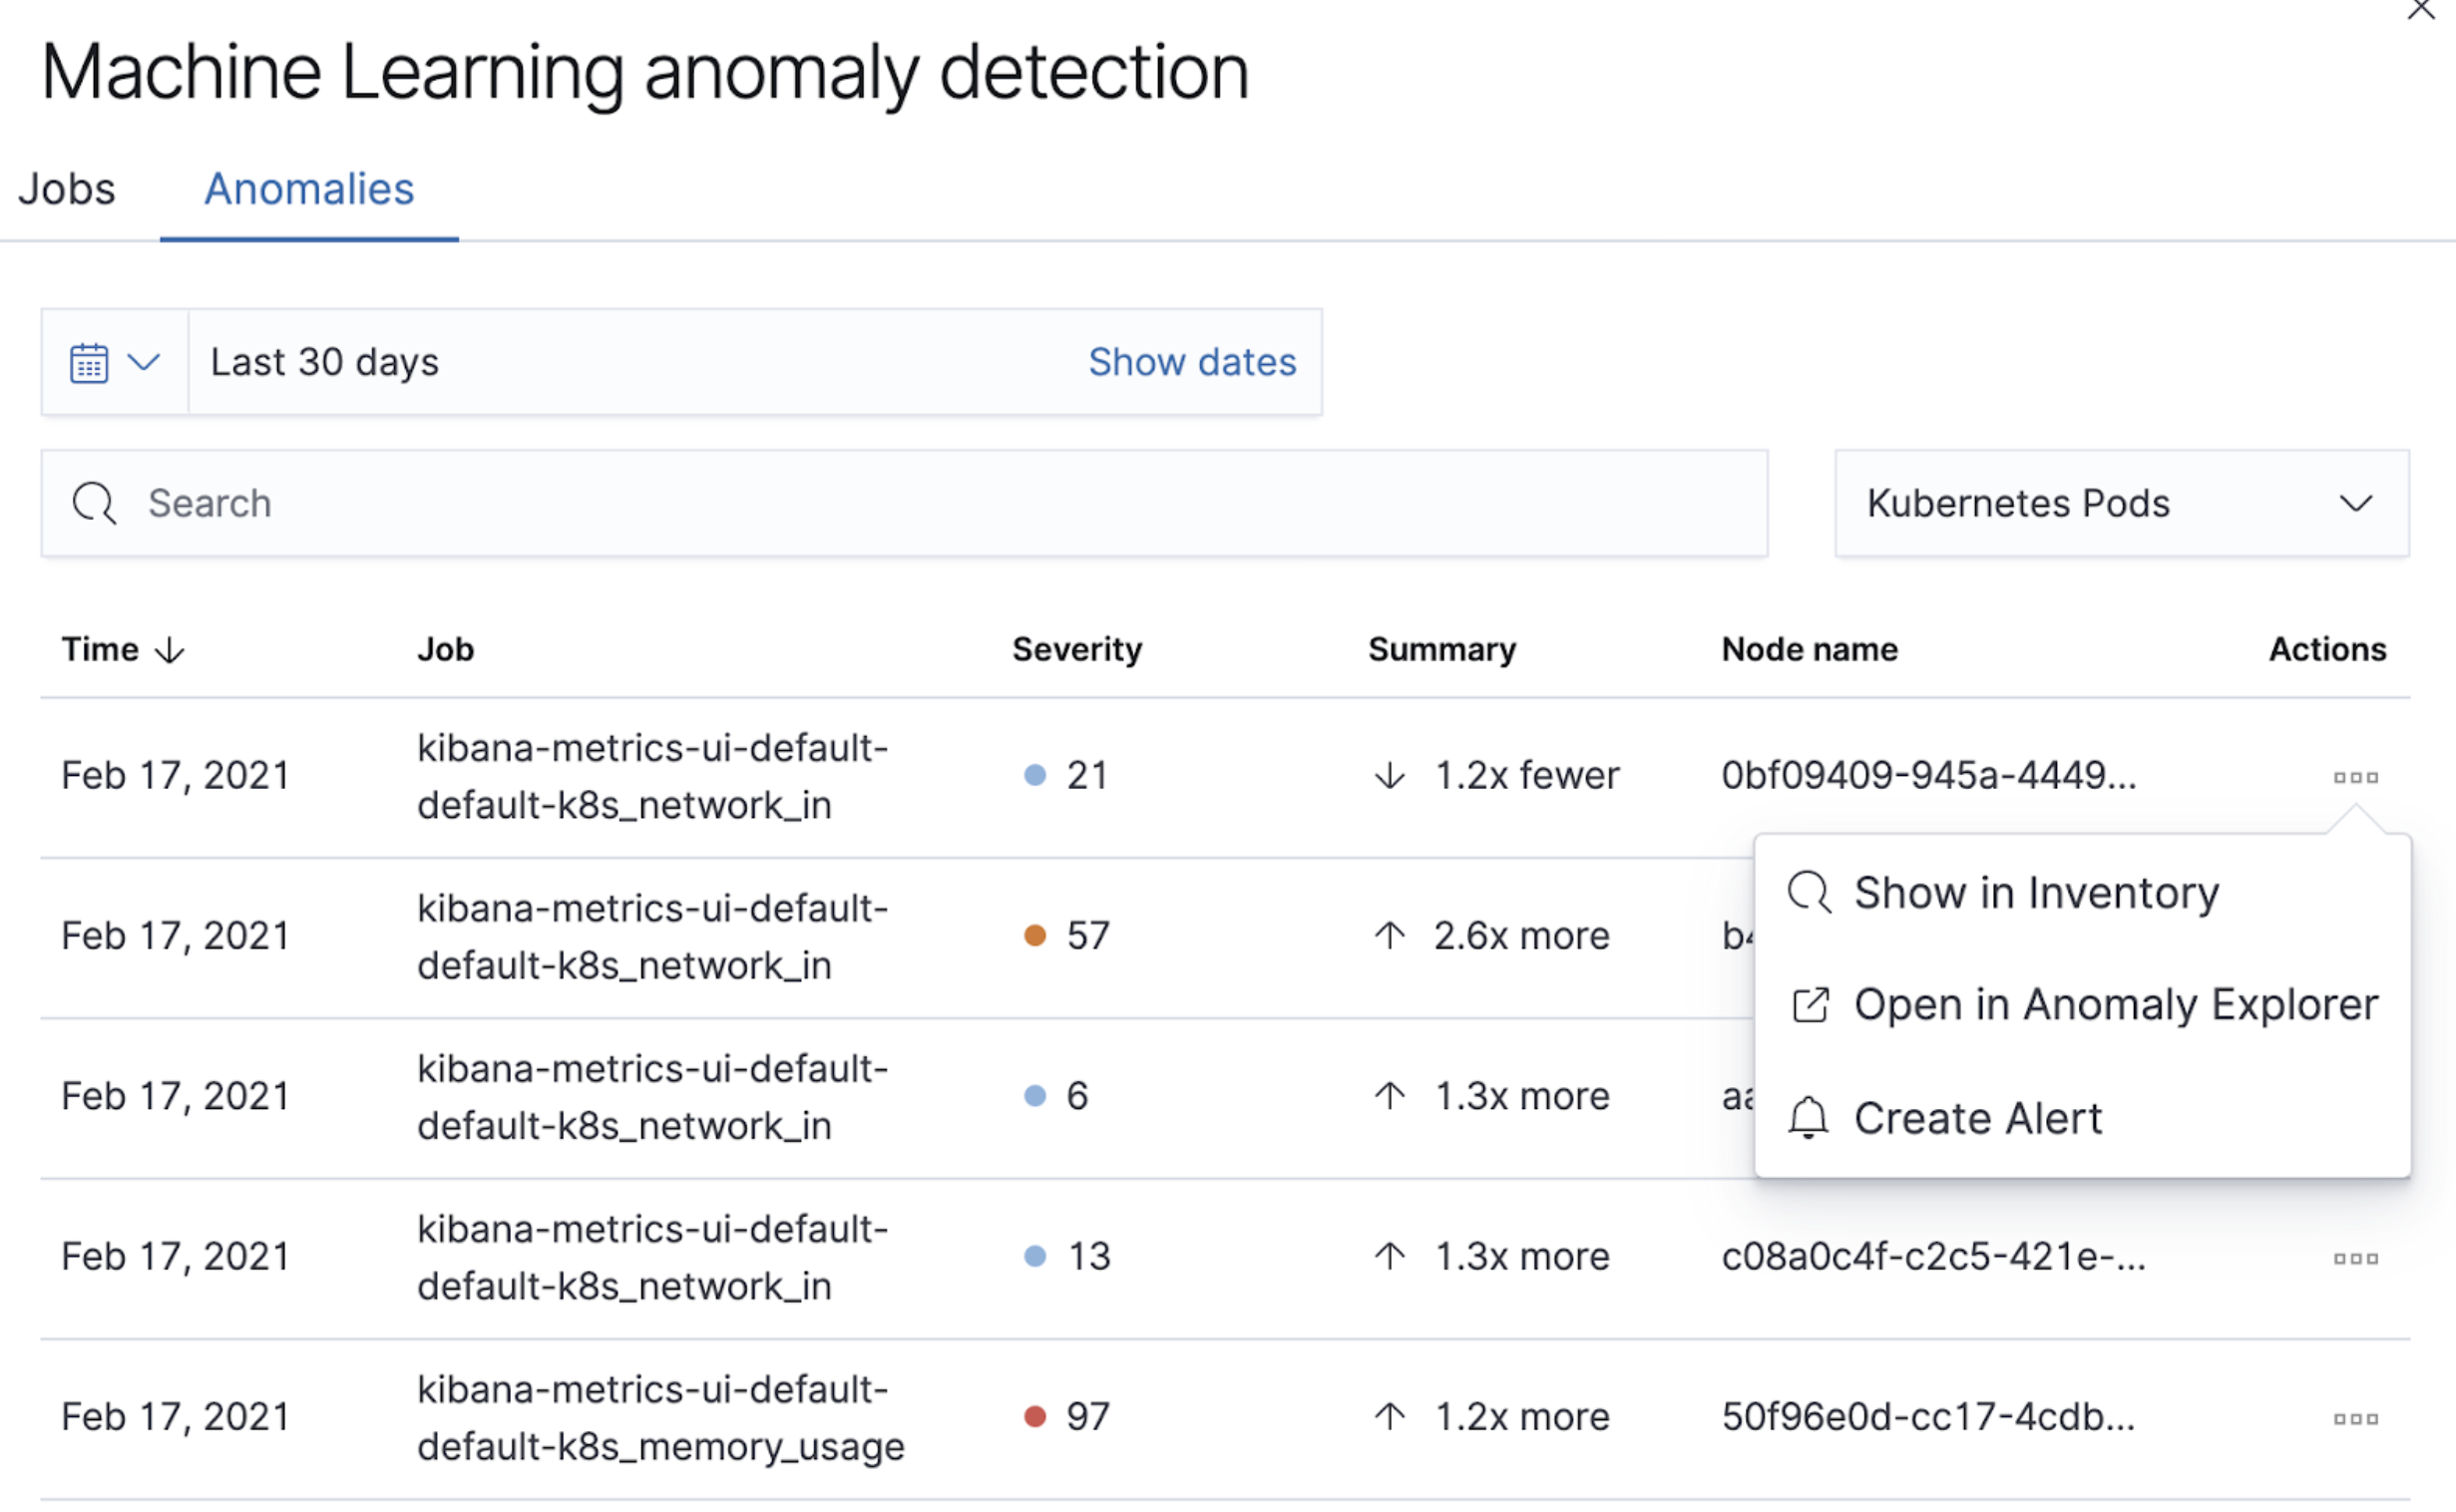 The Anomalies tab in the Anomaly Detection flyout